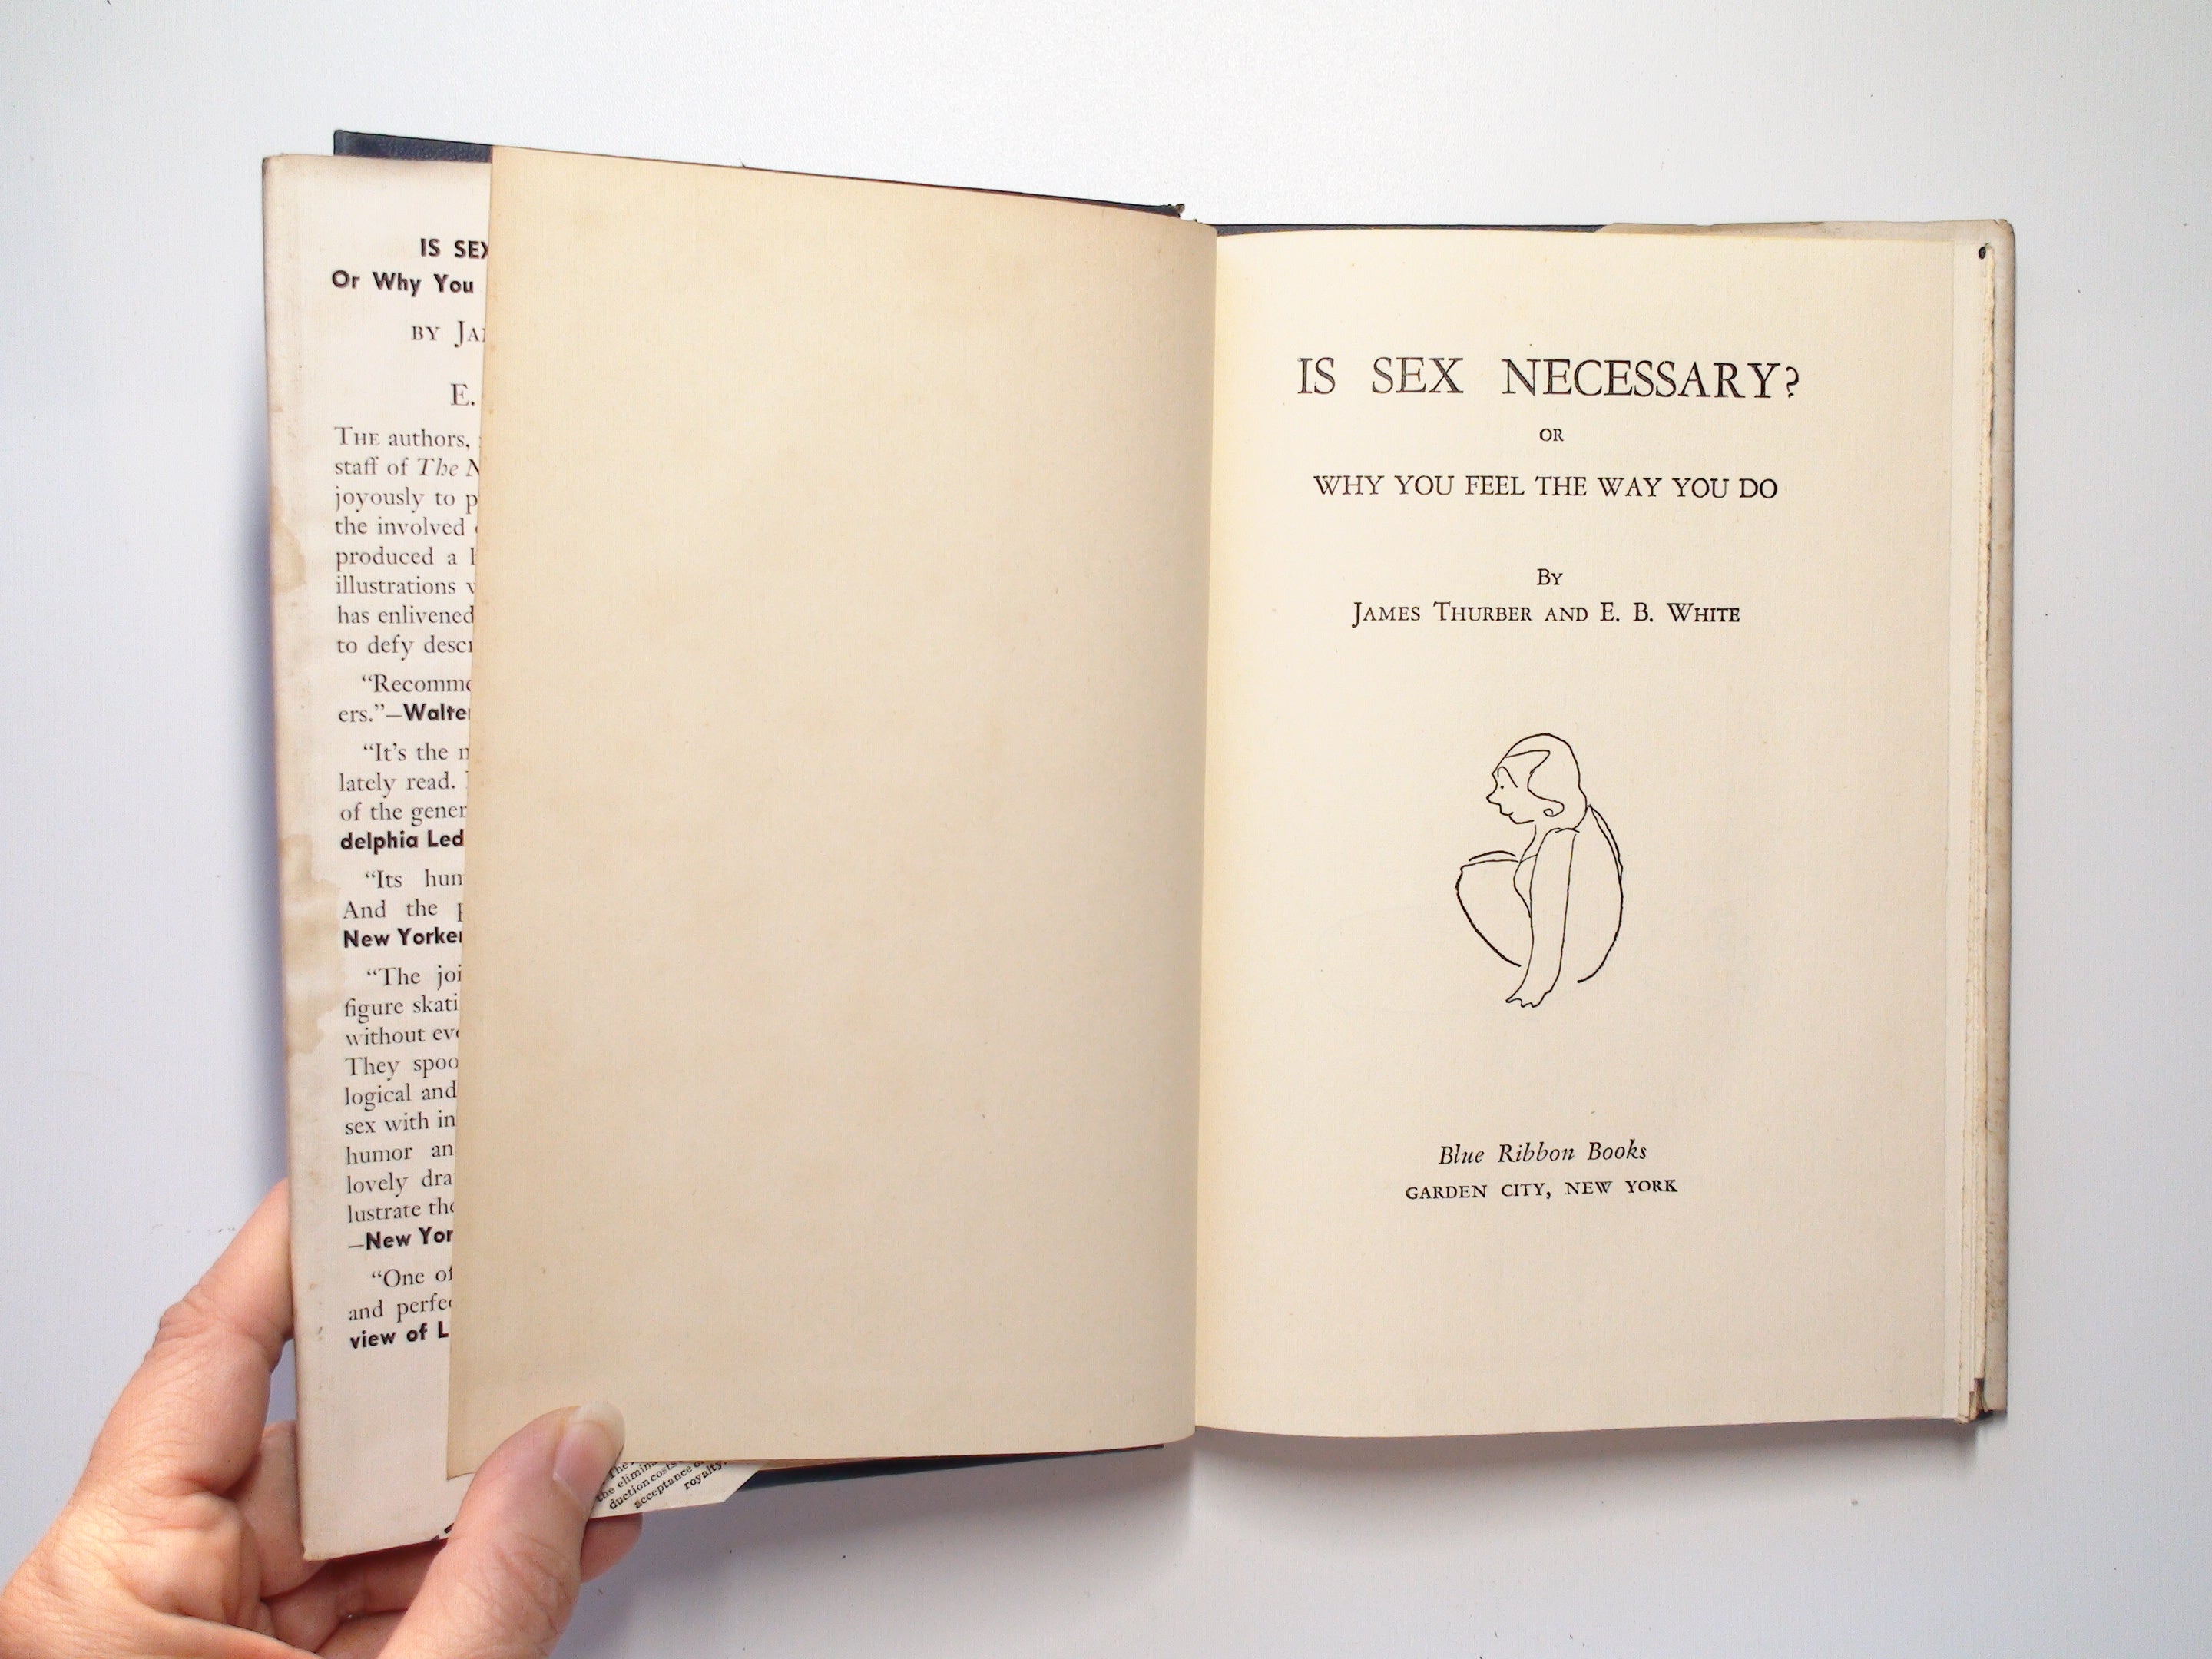 Is Sex Necessary? by James Thurber and E. B. White, with DJ, 1944